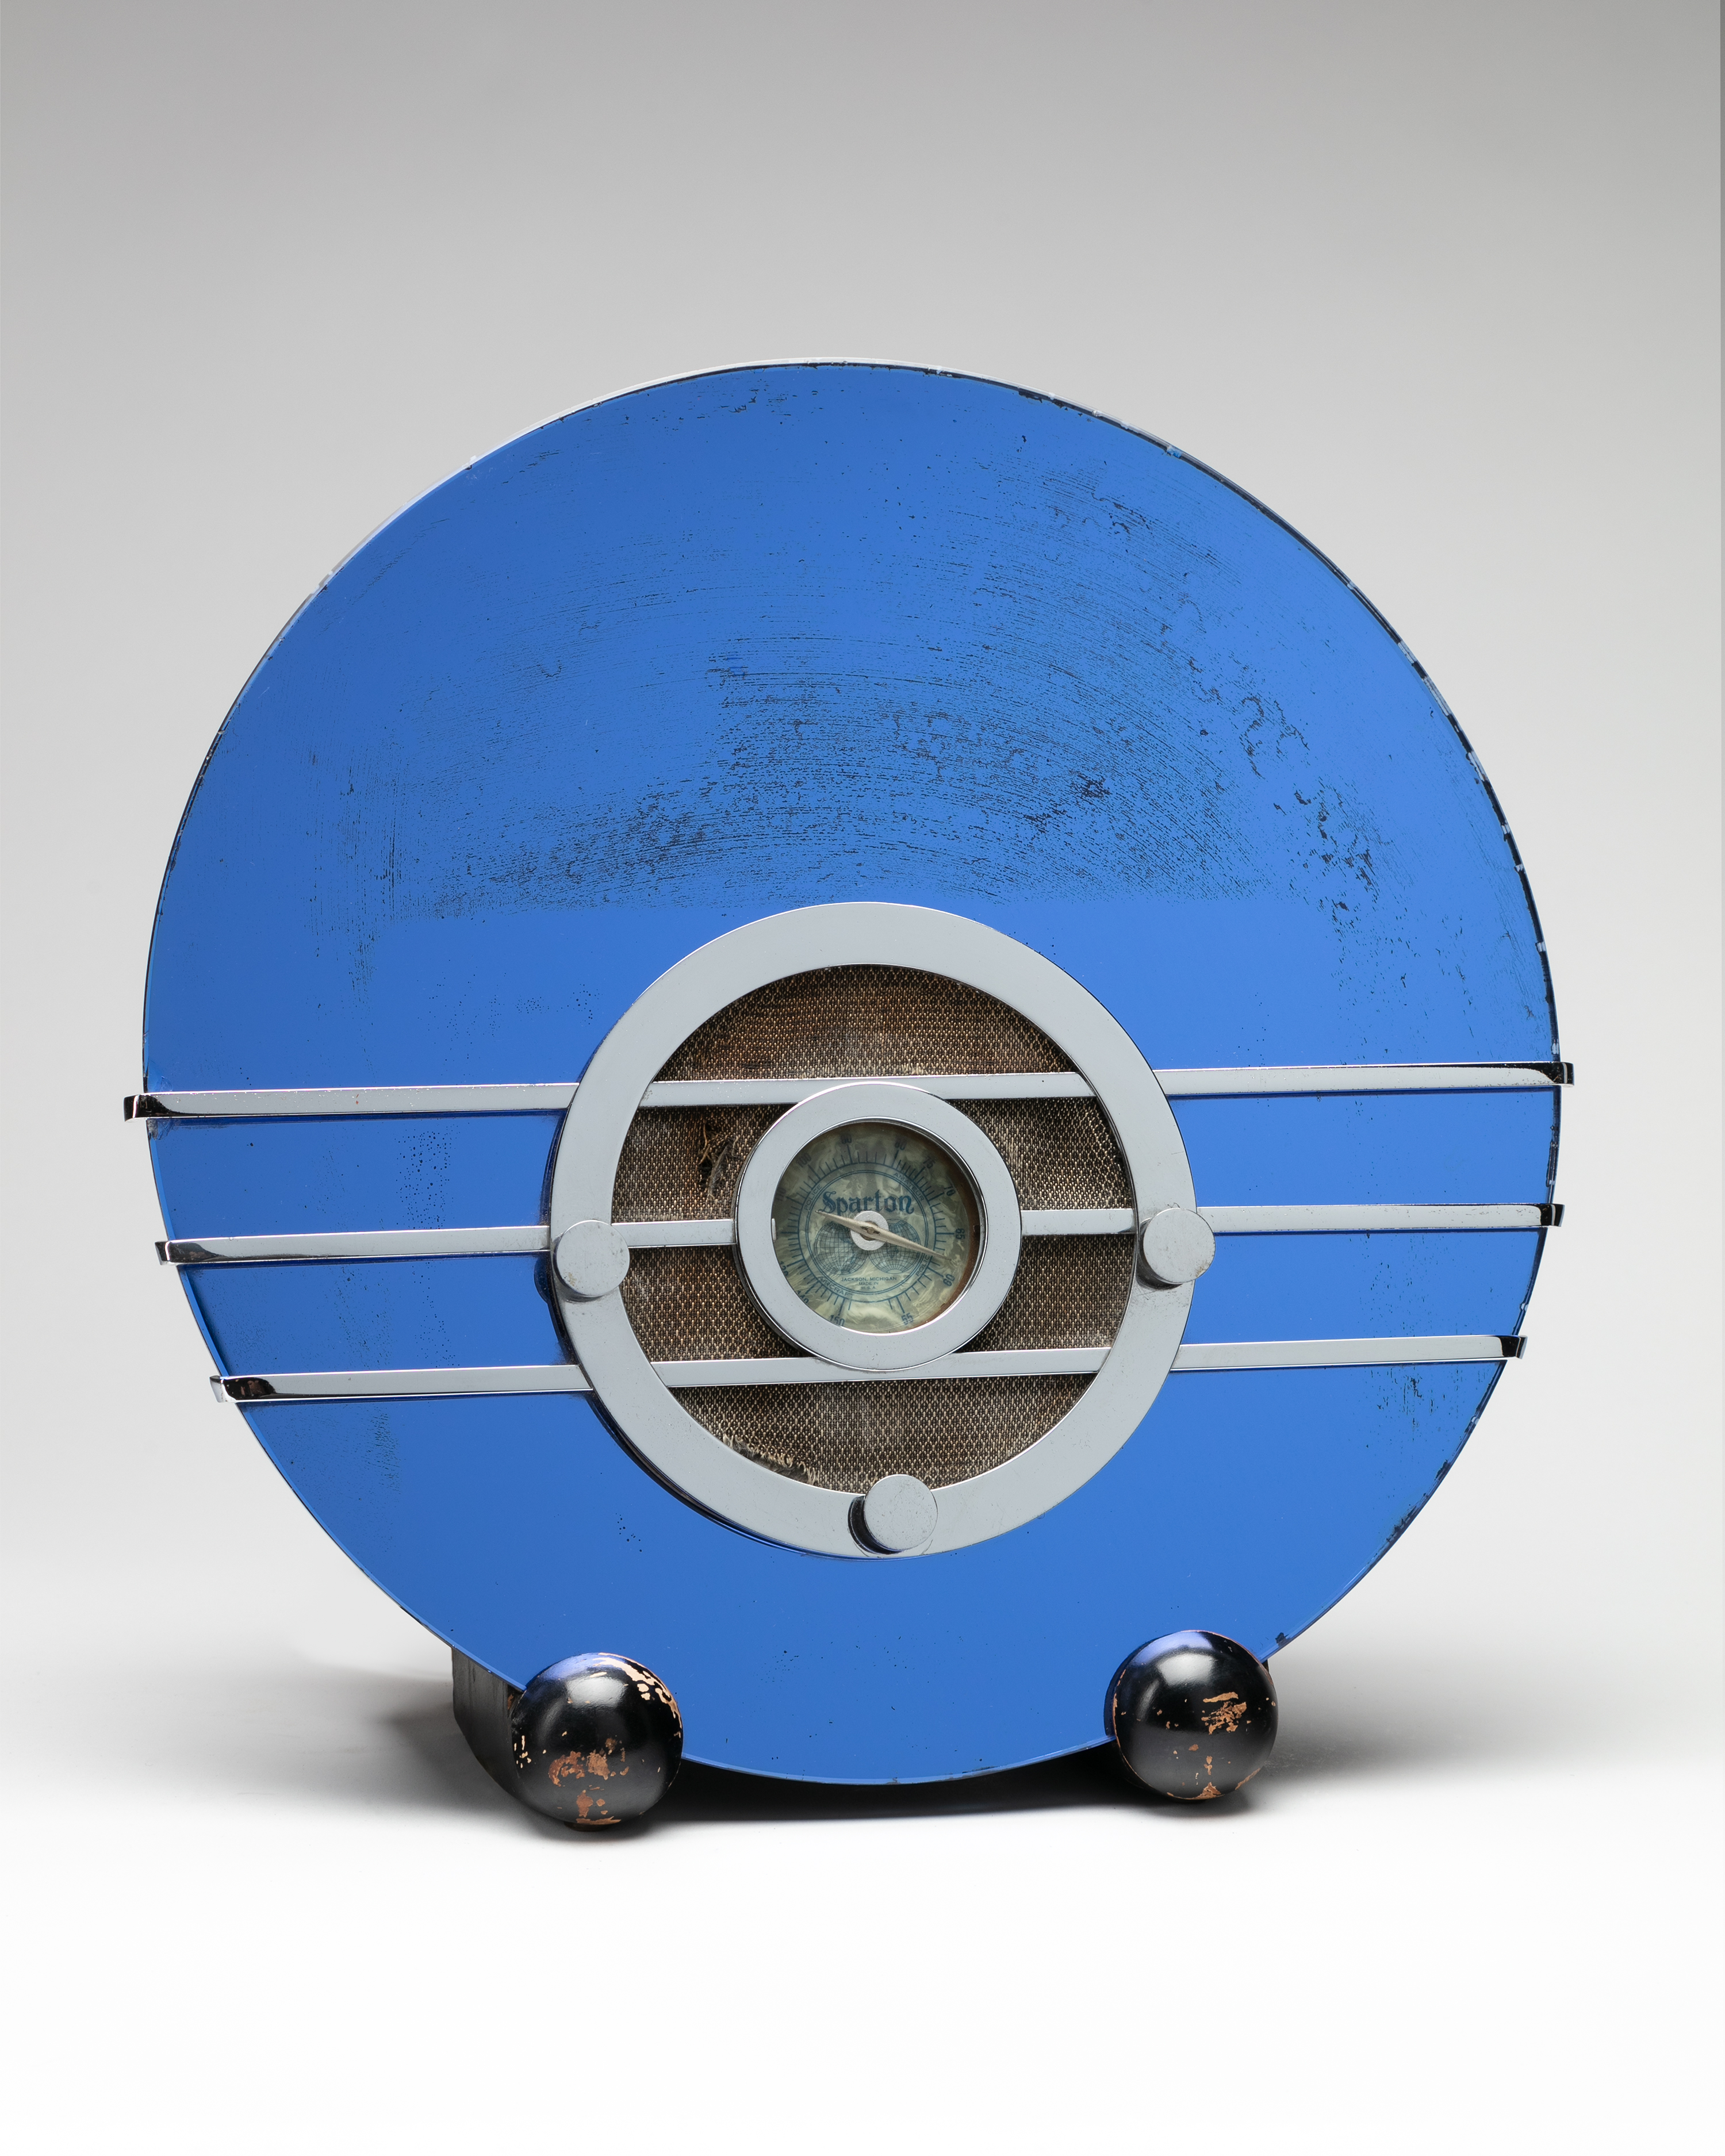 Sparton Bluebird radio (Model 566), 1934, wood, glass and metal. Walter Dorwin Teague, designer, American, 1883-1960. Sparks-Withington Company, manufacturer, Jackson, Michigan, founded 1900. 14 3/4 by 14 5/8 by 6in. Collection Kirkland Museum of Fine & Decorative Art, Denver, 2004.1850. Courtesy of Kirkland Museum of Fine & Decorative Art, Denver. Photo by Wes Magyar